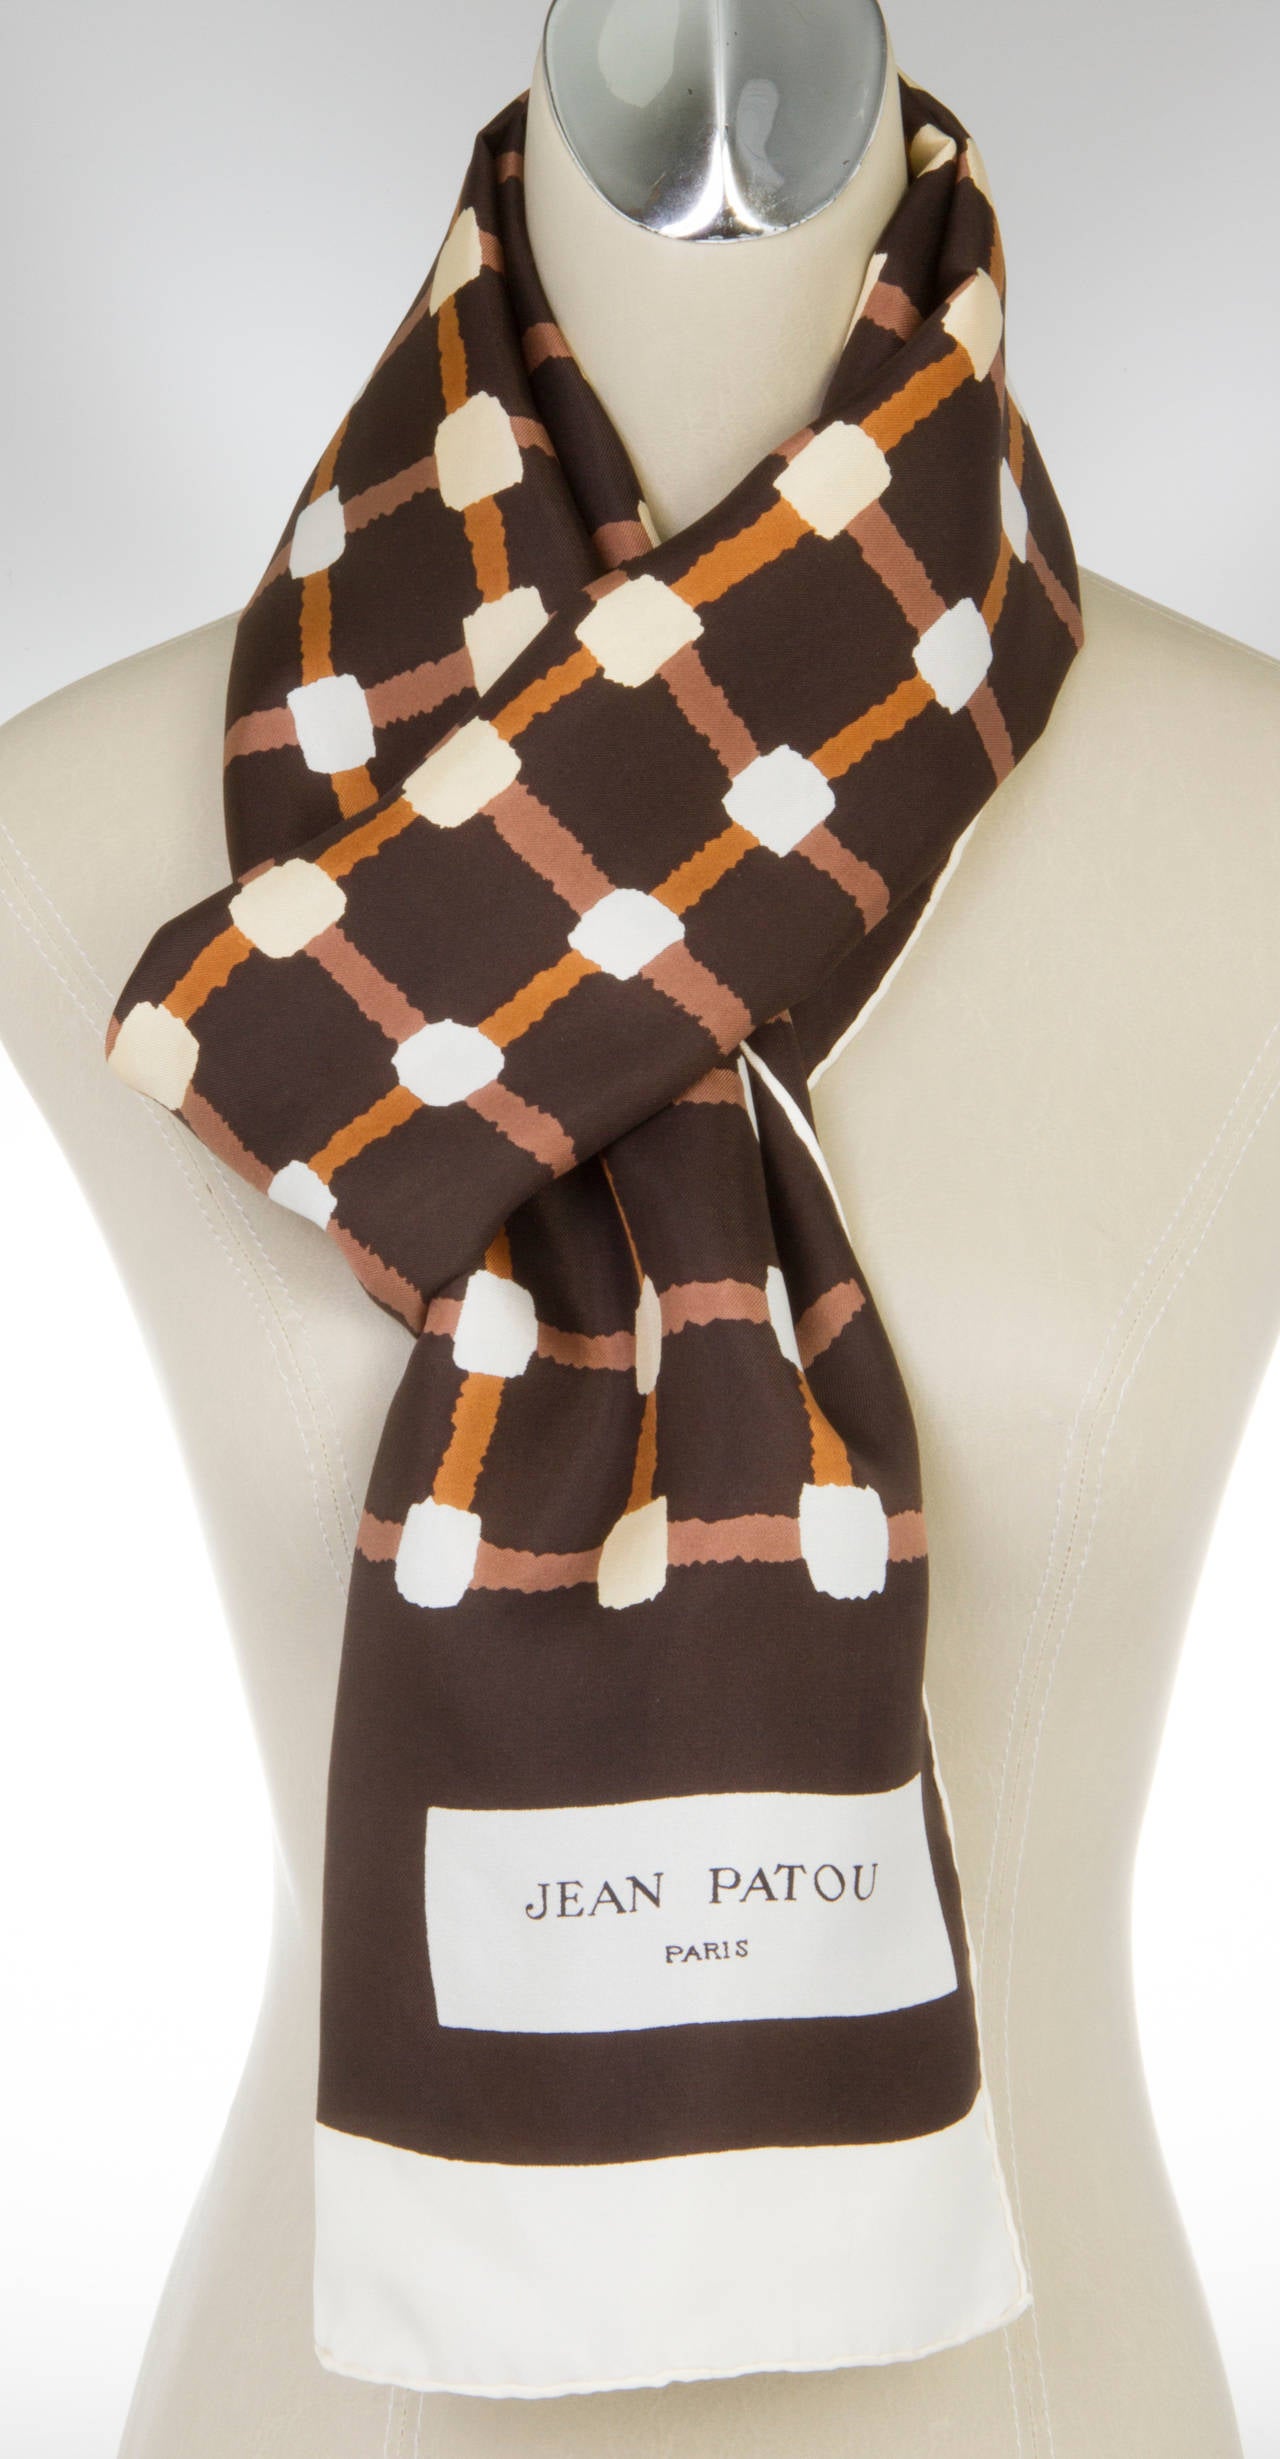 This scarf is beautifully designed and looks beautiful on.